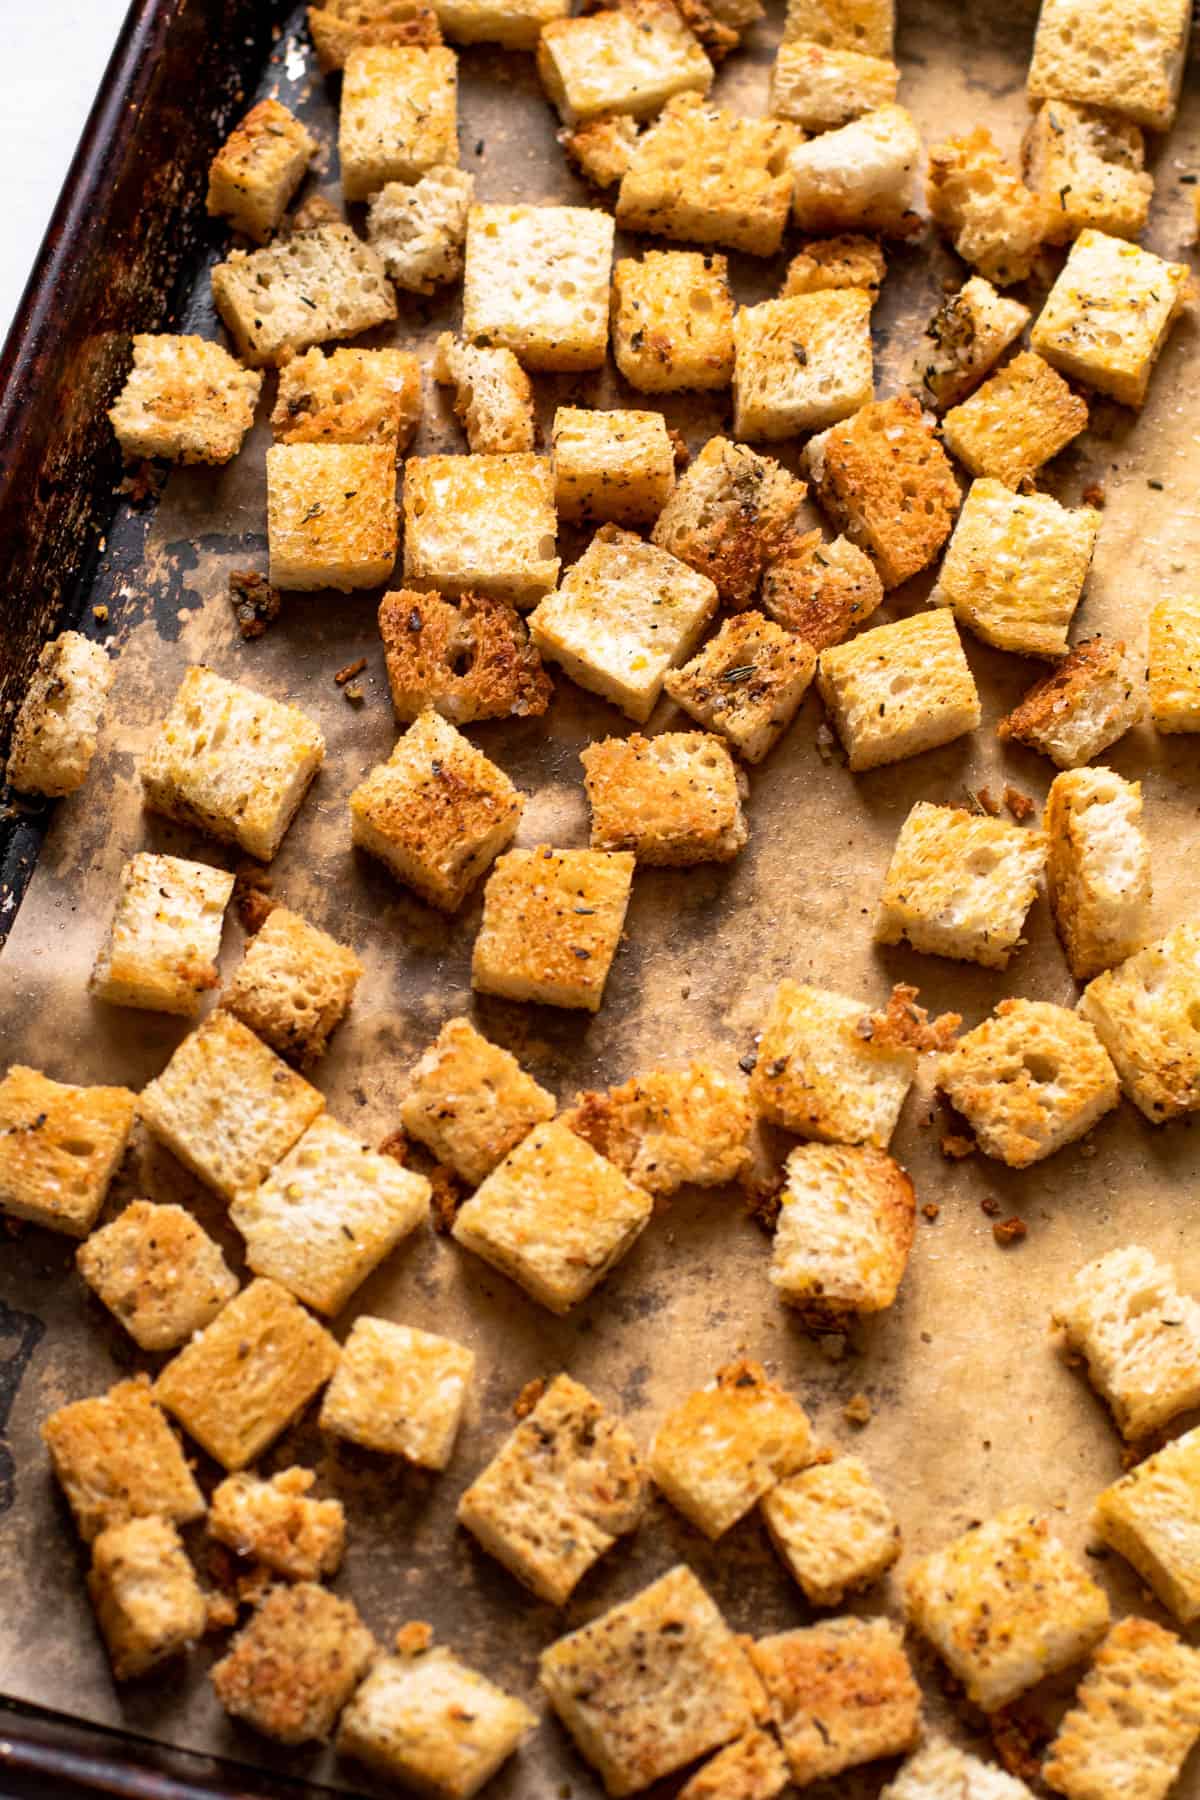 Baked croutons on a baking sheet.